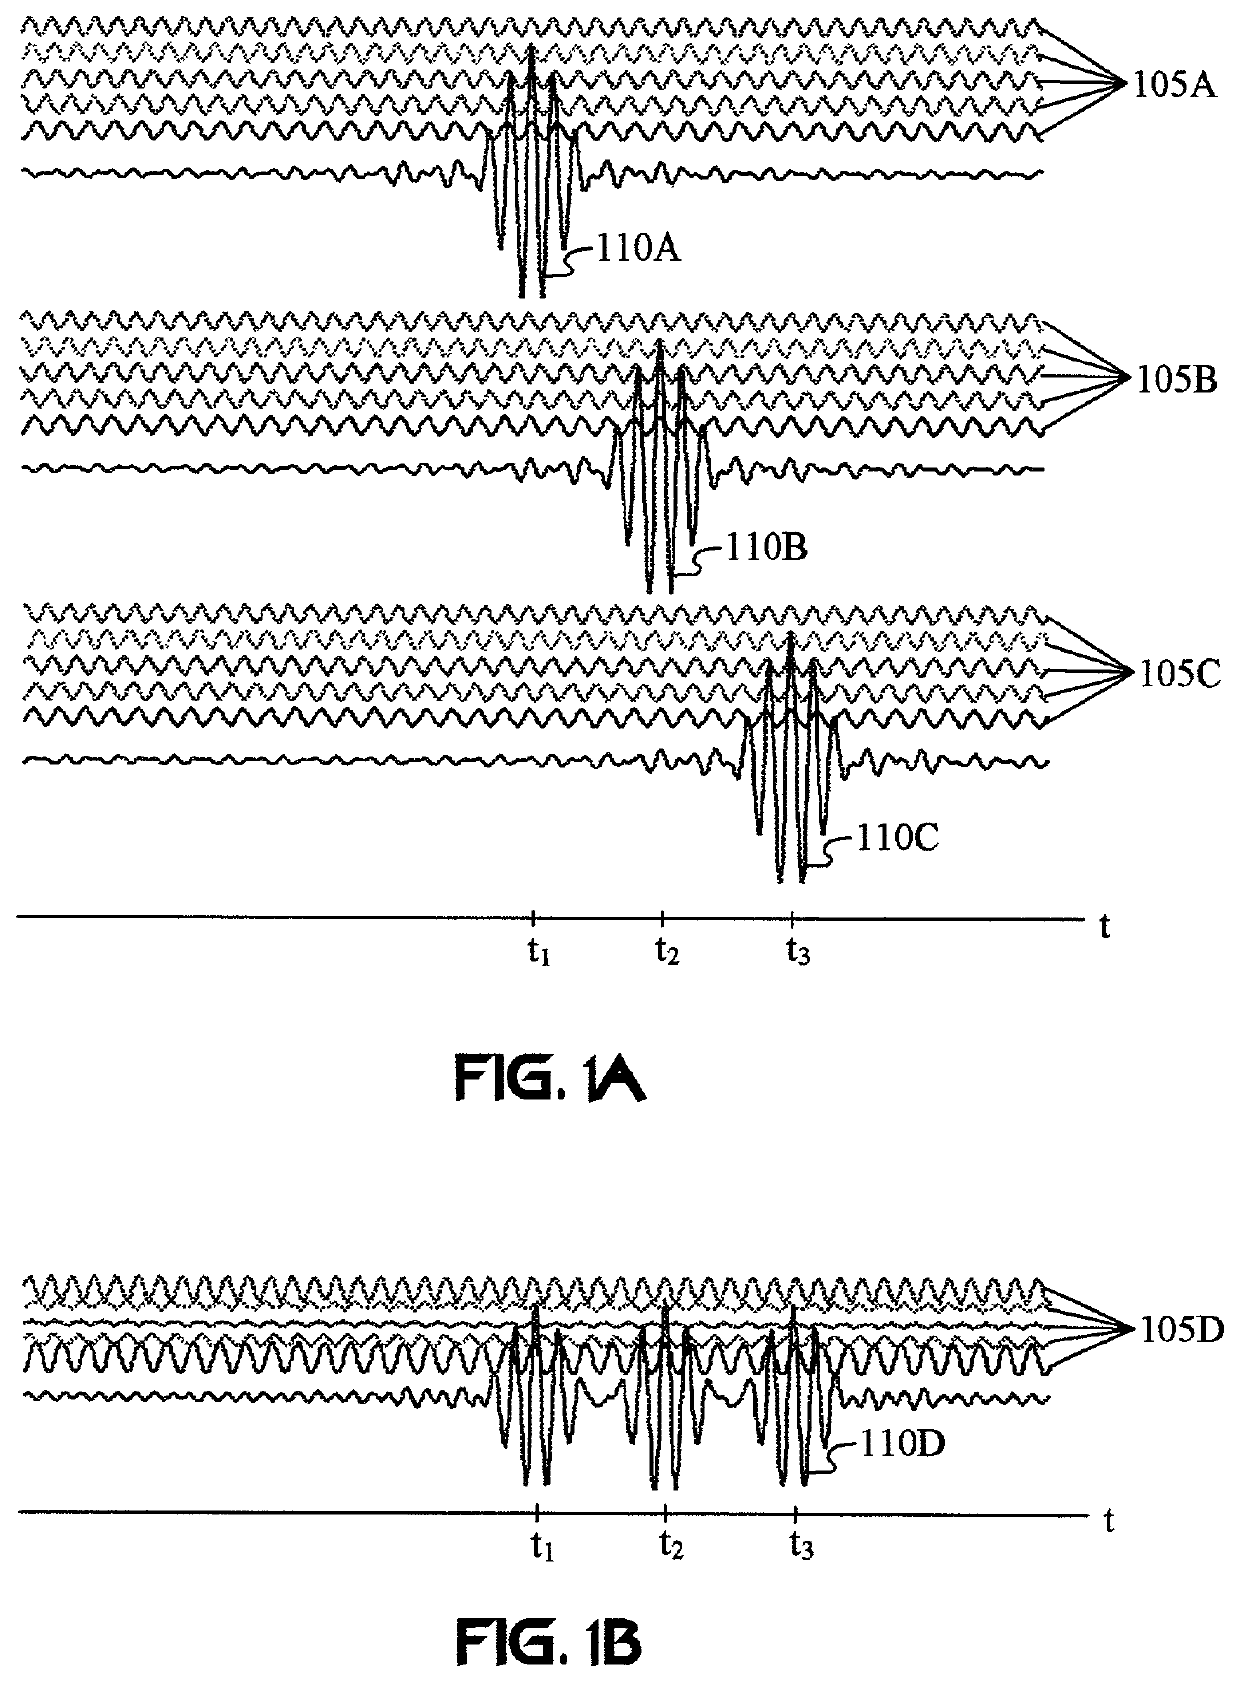 Single carrier frequency division multiple access baseband signal generation